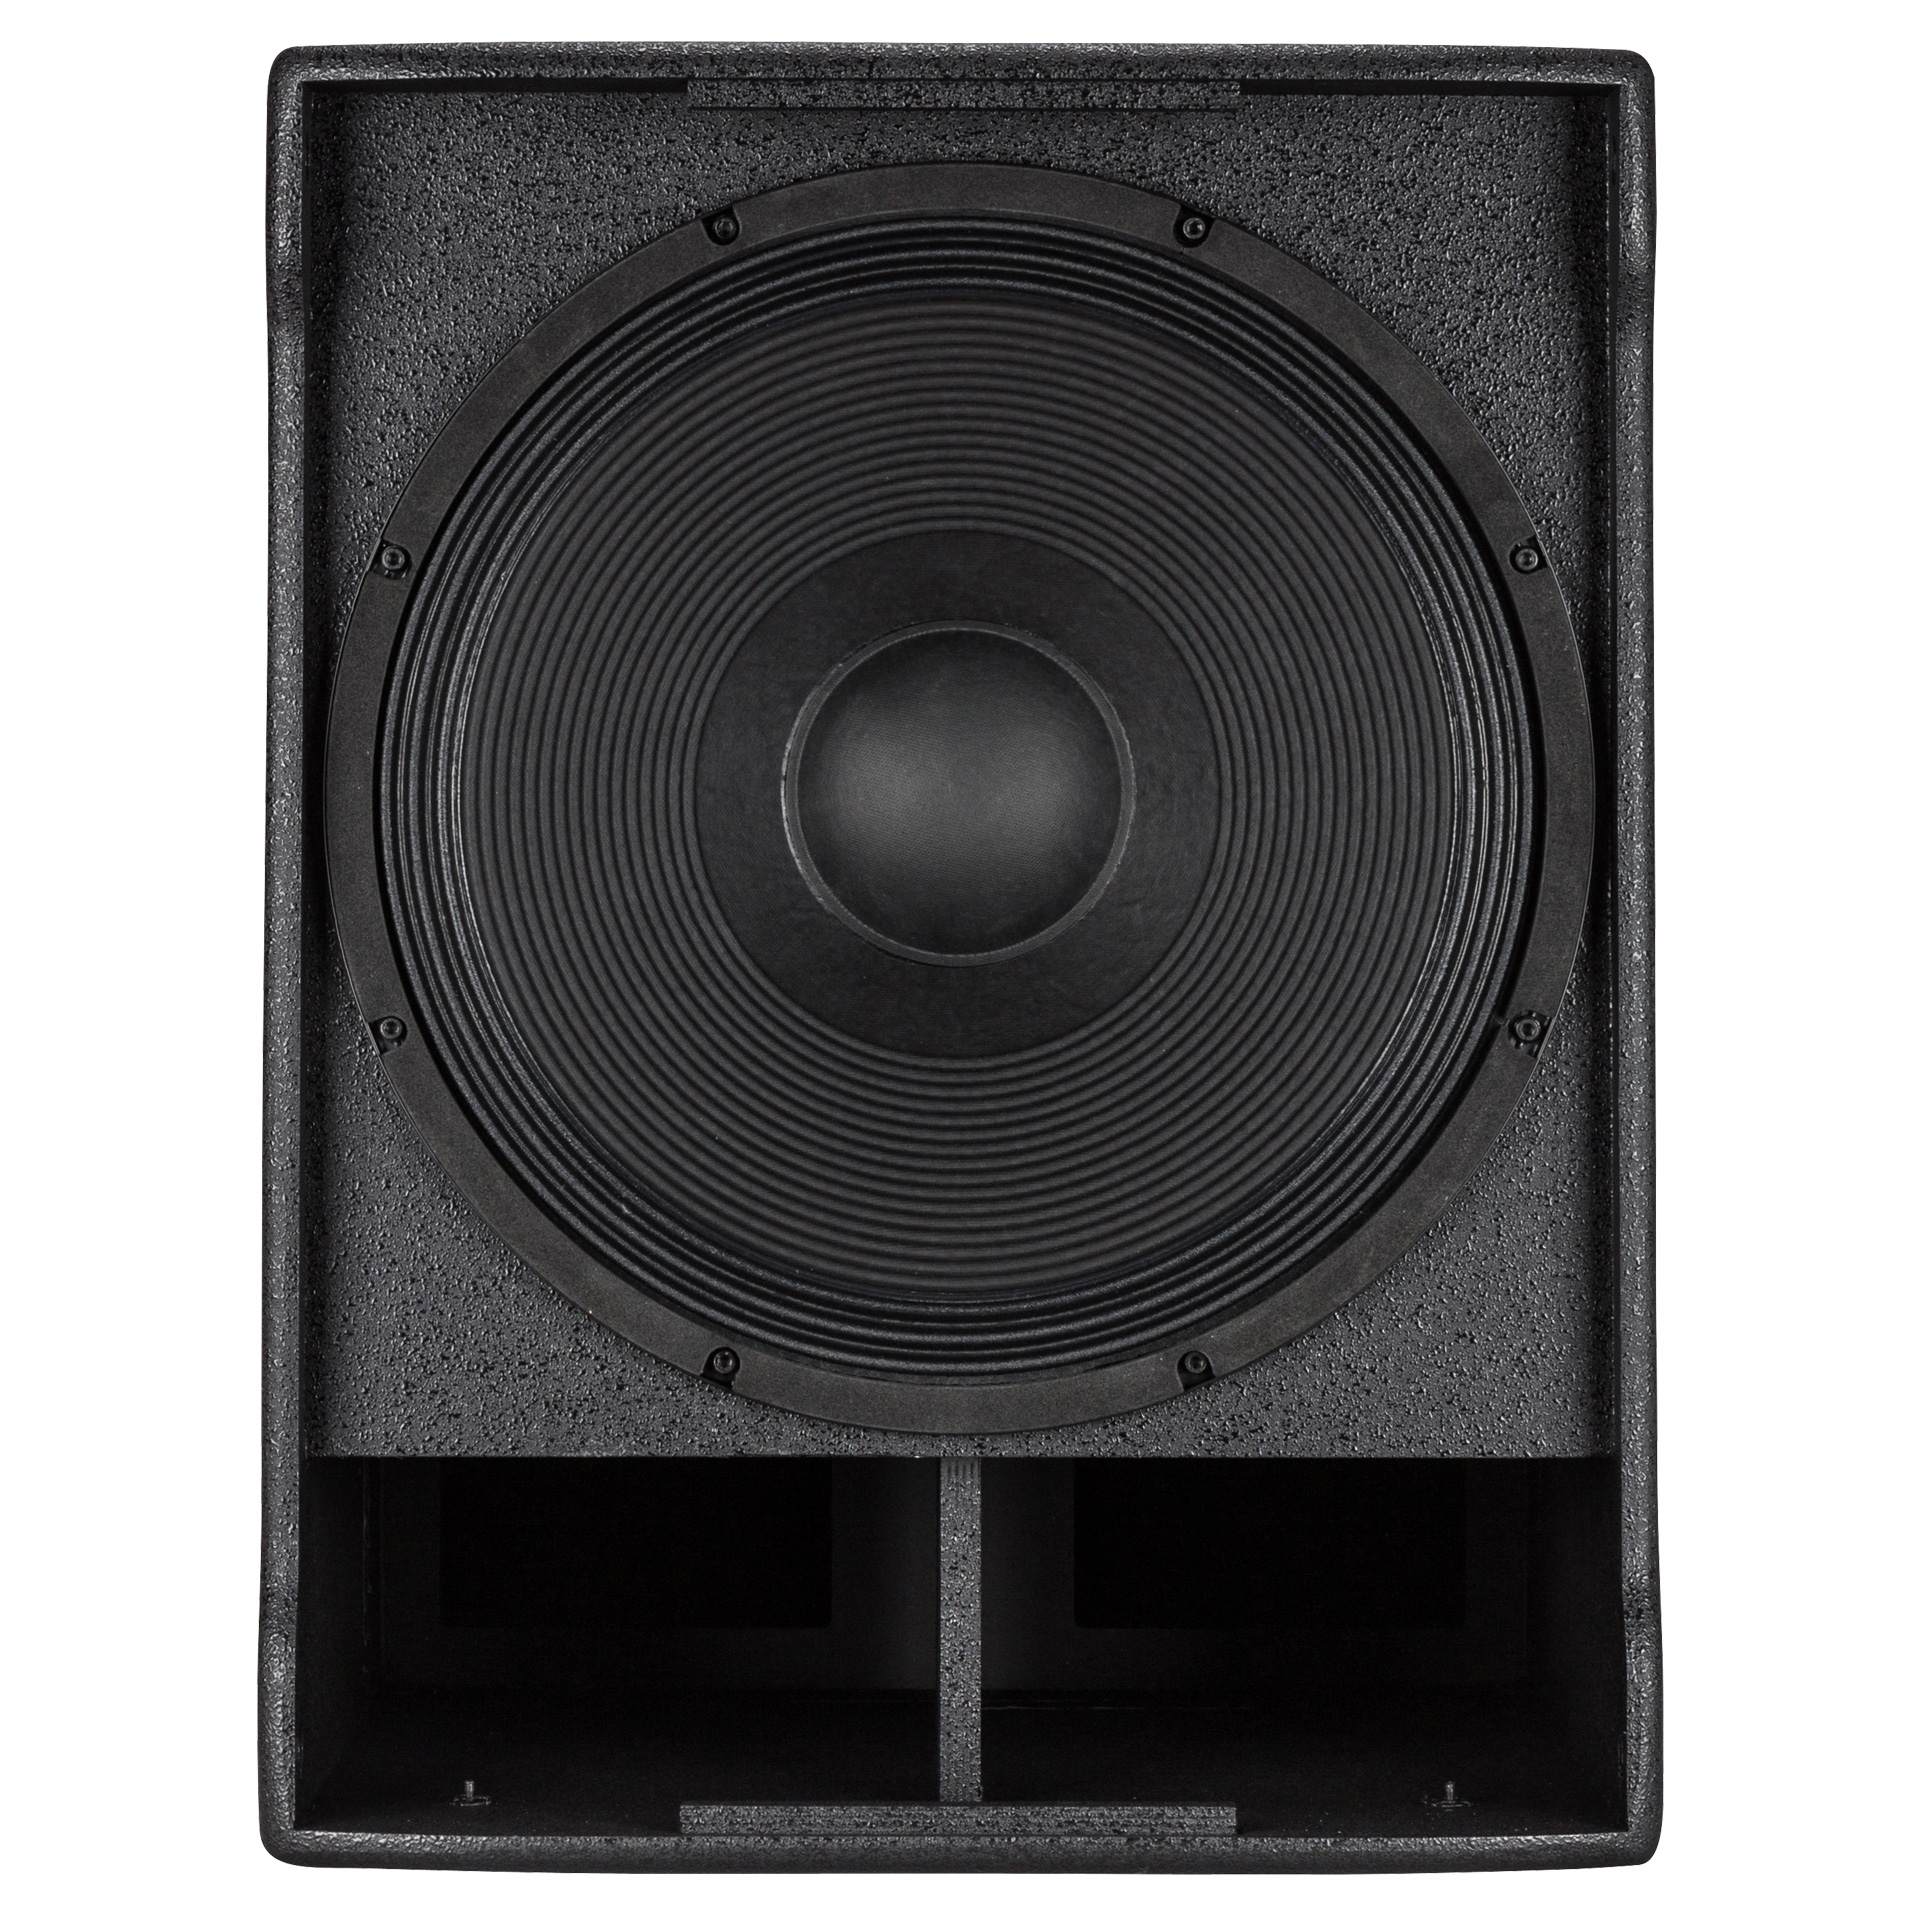 Rcf Sub 708-as Ii - Active subwoofer - Variation 3